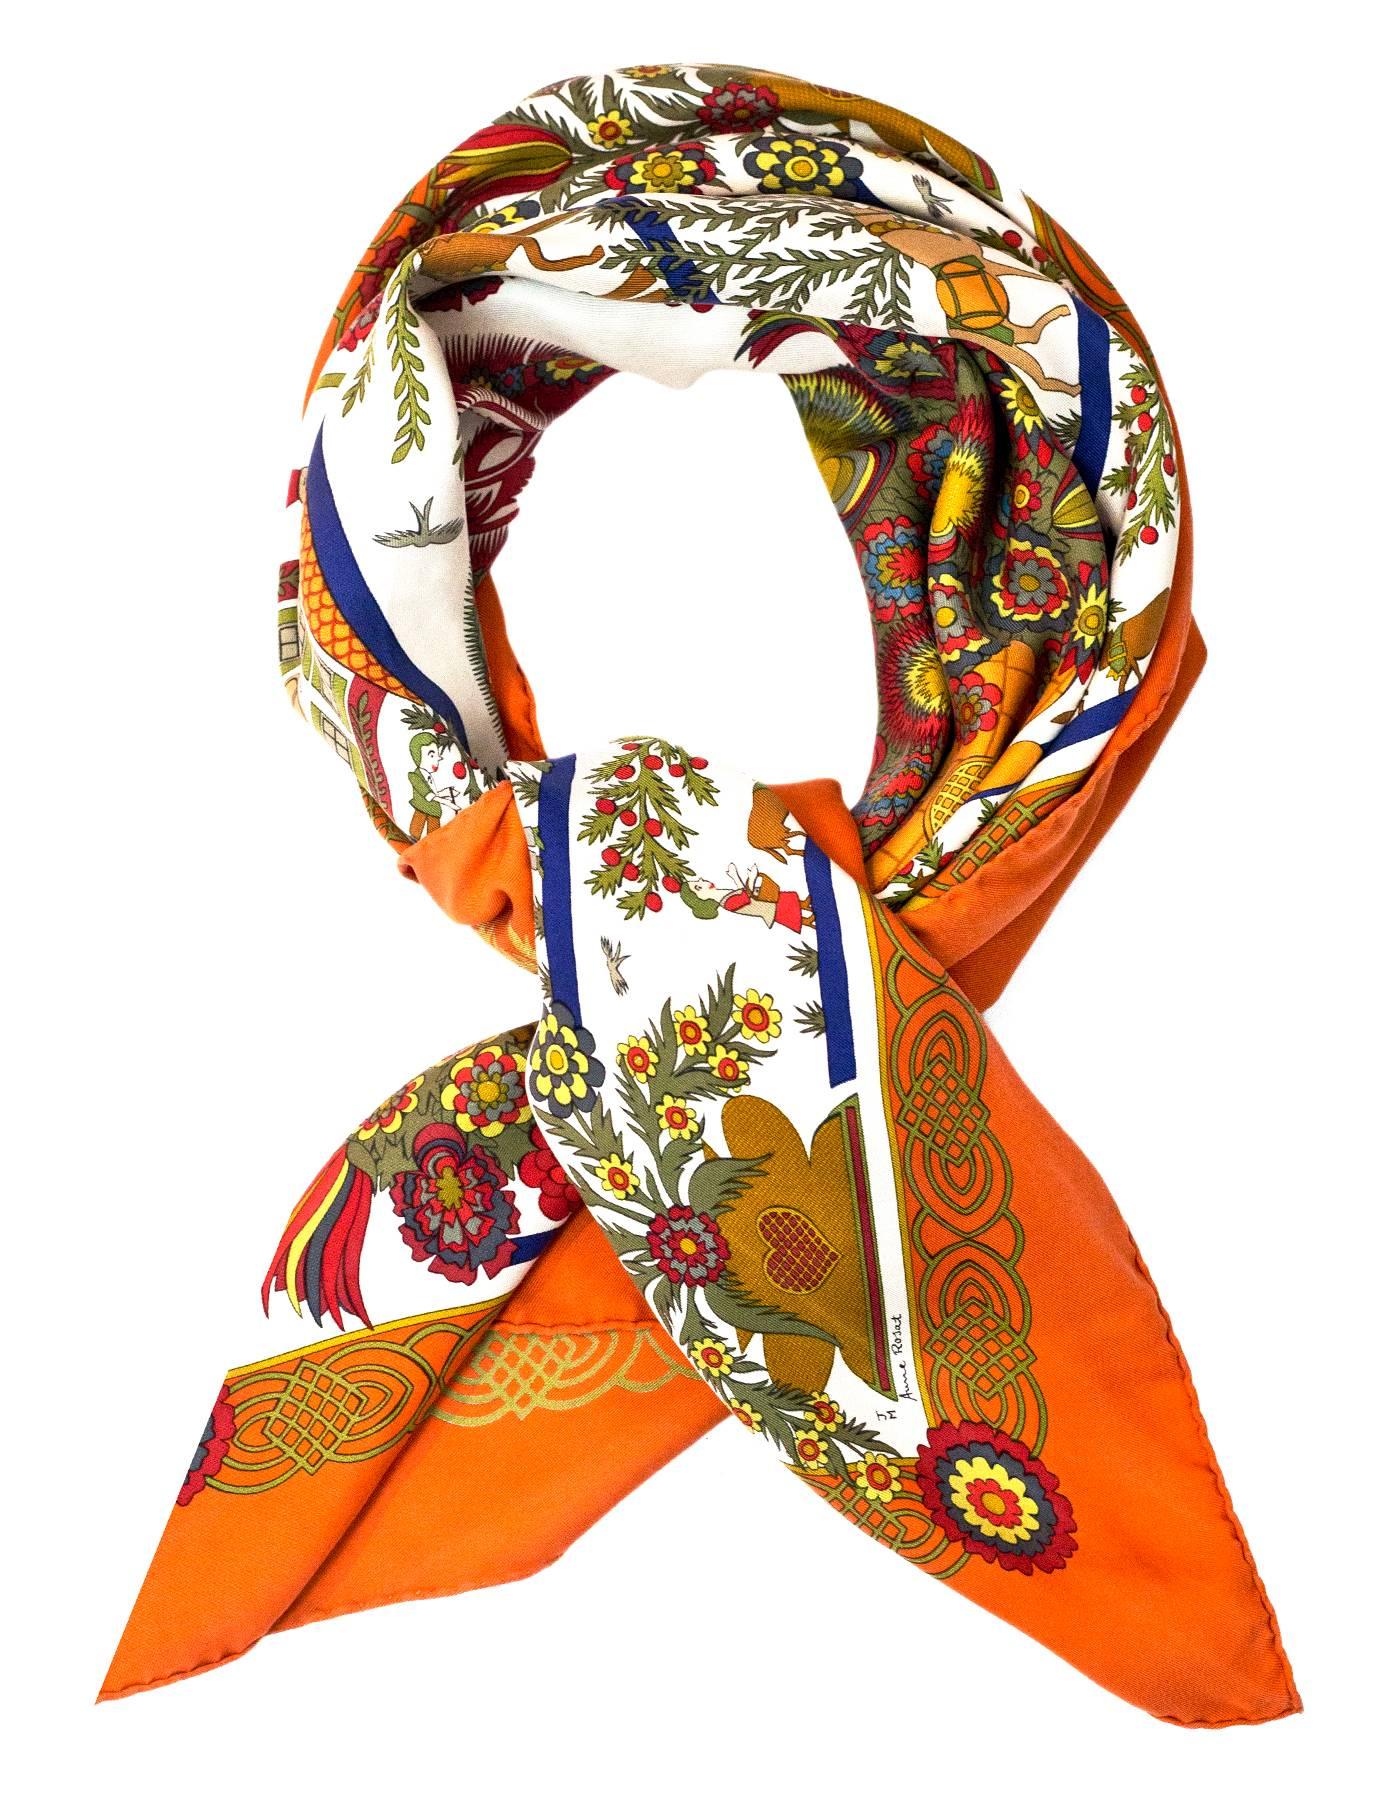 Hermes Vintage Burnt Orange D'ecoupages Silk 90cm Scarf

Made In: France
Color: Orange, green, ivory
Composition: 100% Silk
Retail Price: $395 + tax
Overall Condition: Excellent pre-owned vintage condition, minor fading of